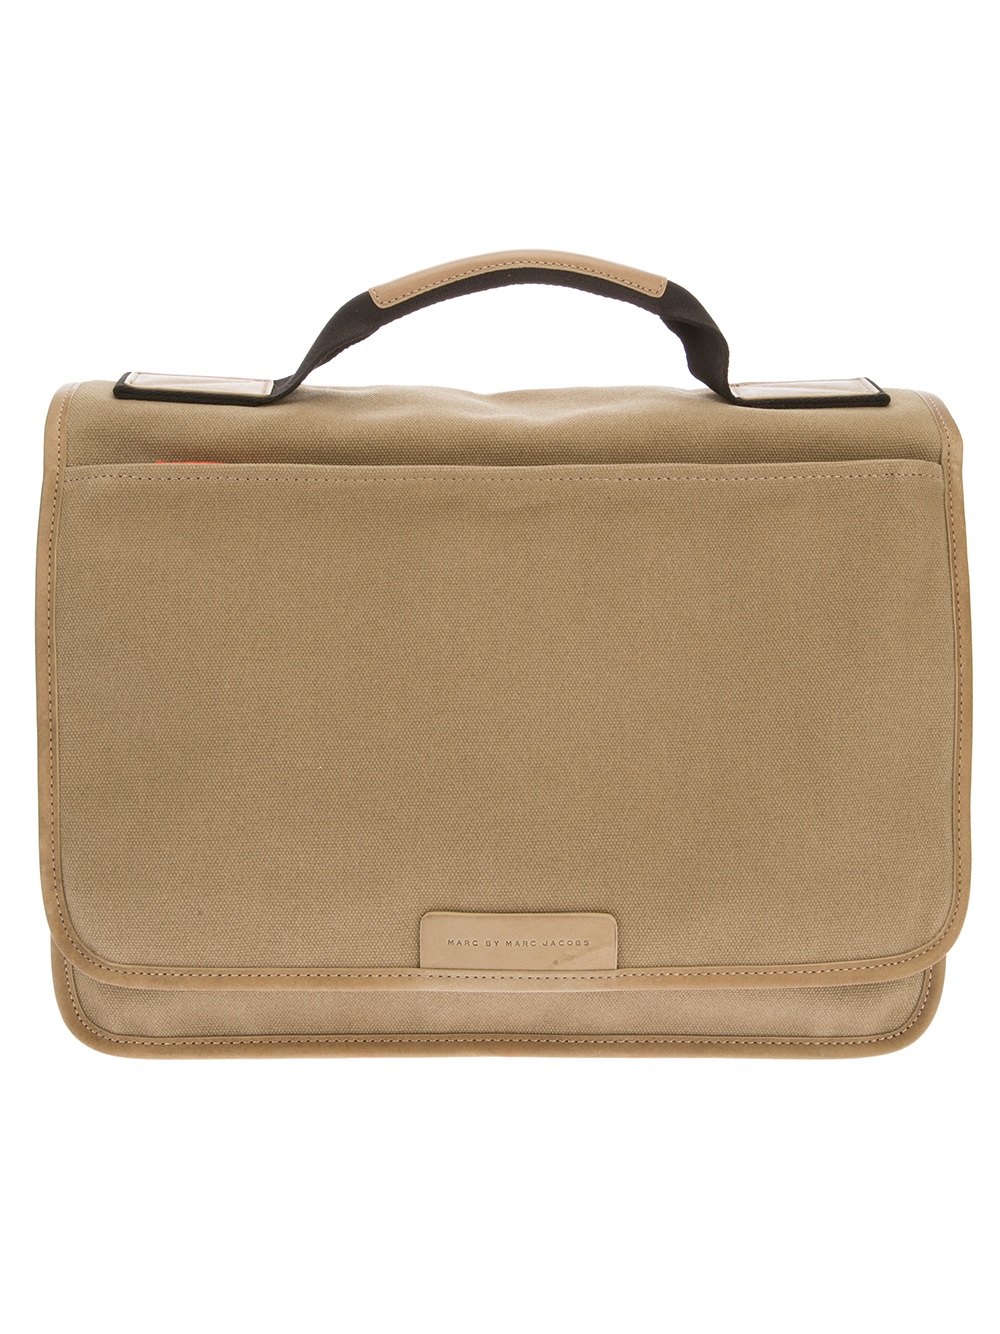 Marc By Marc Jacobs Canvas Messenger Bag in Brown for Men | Lyst